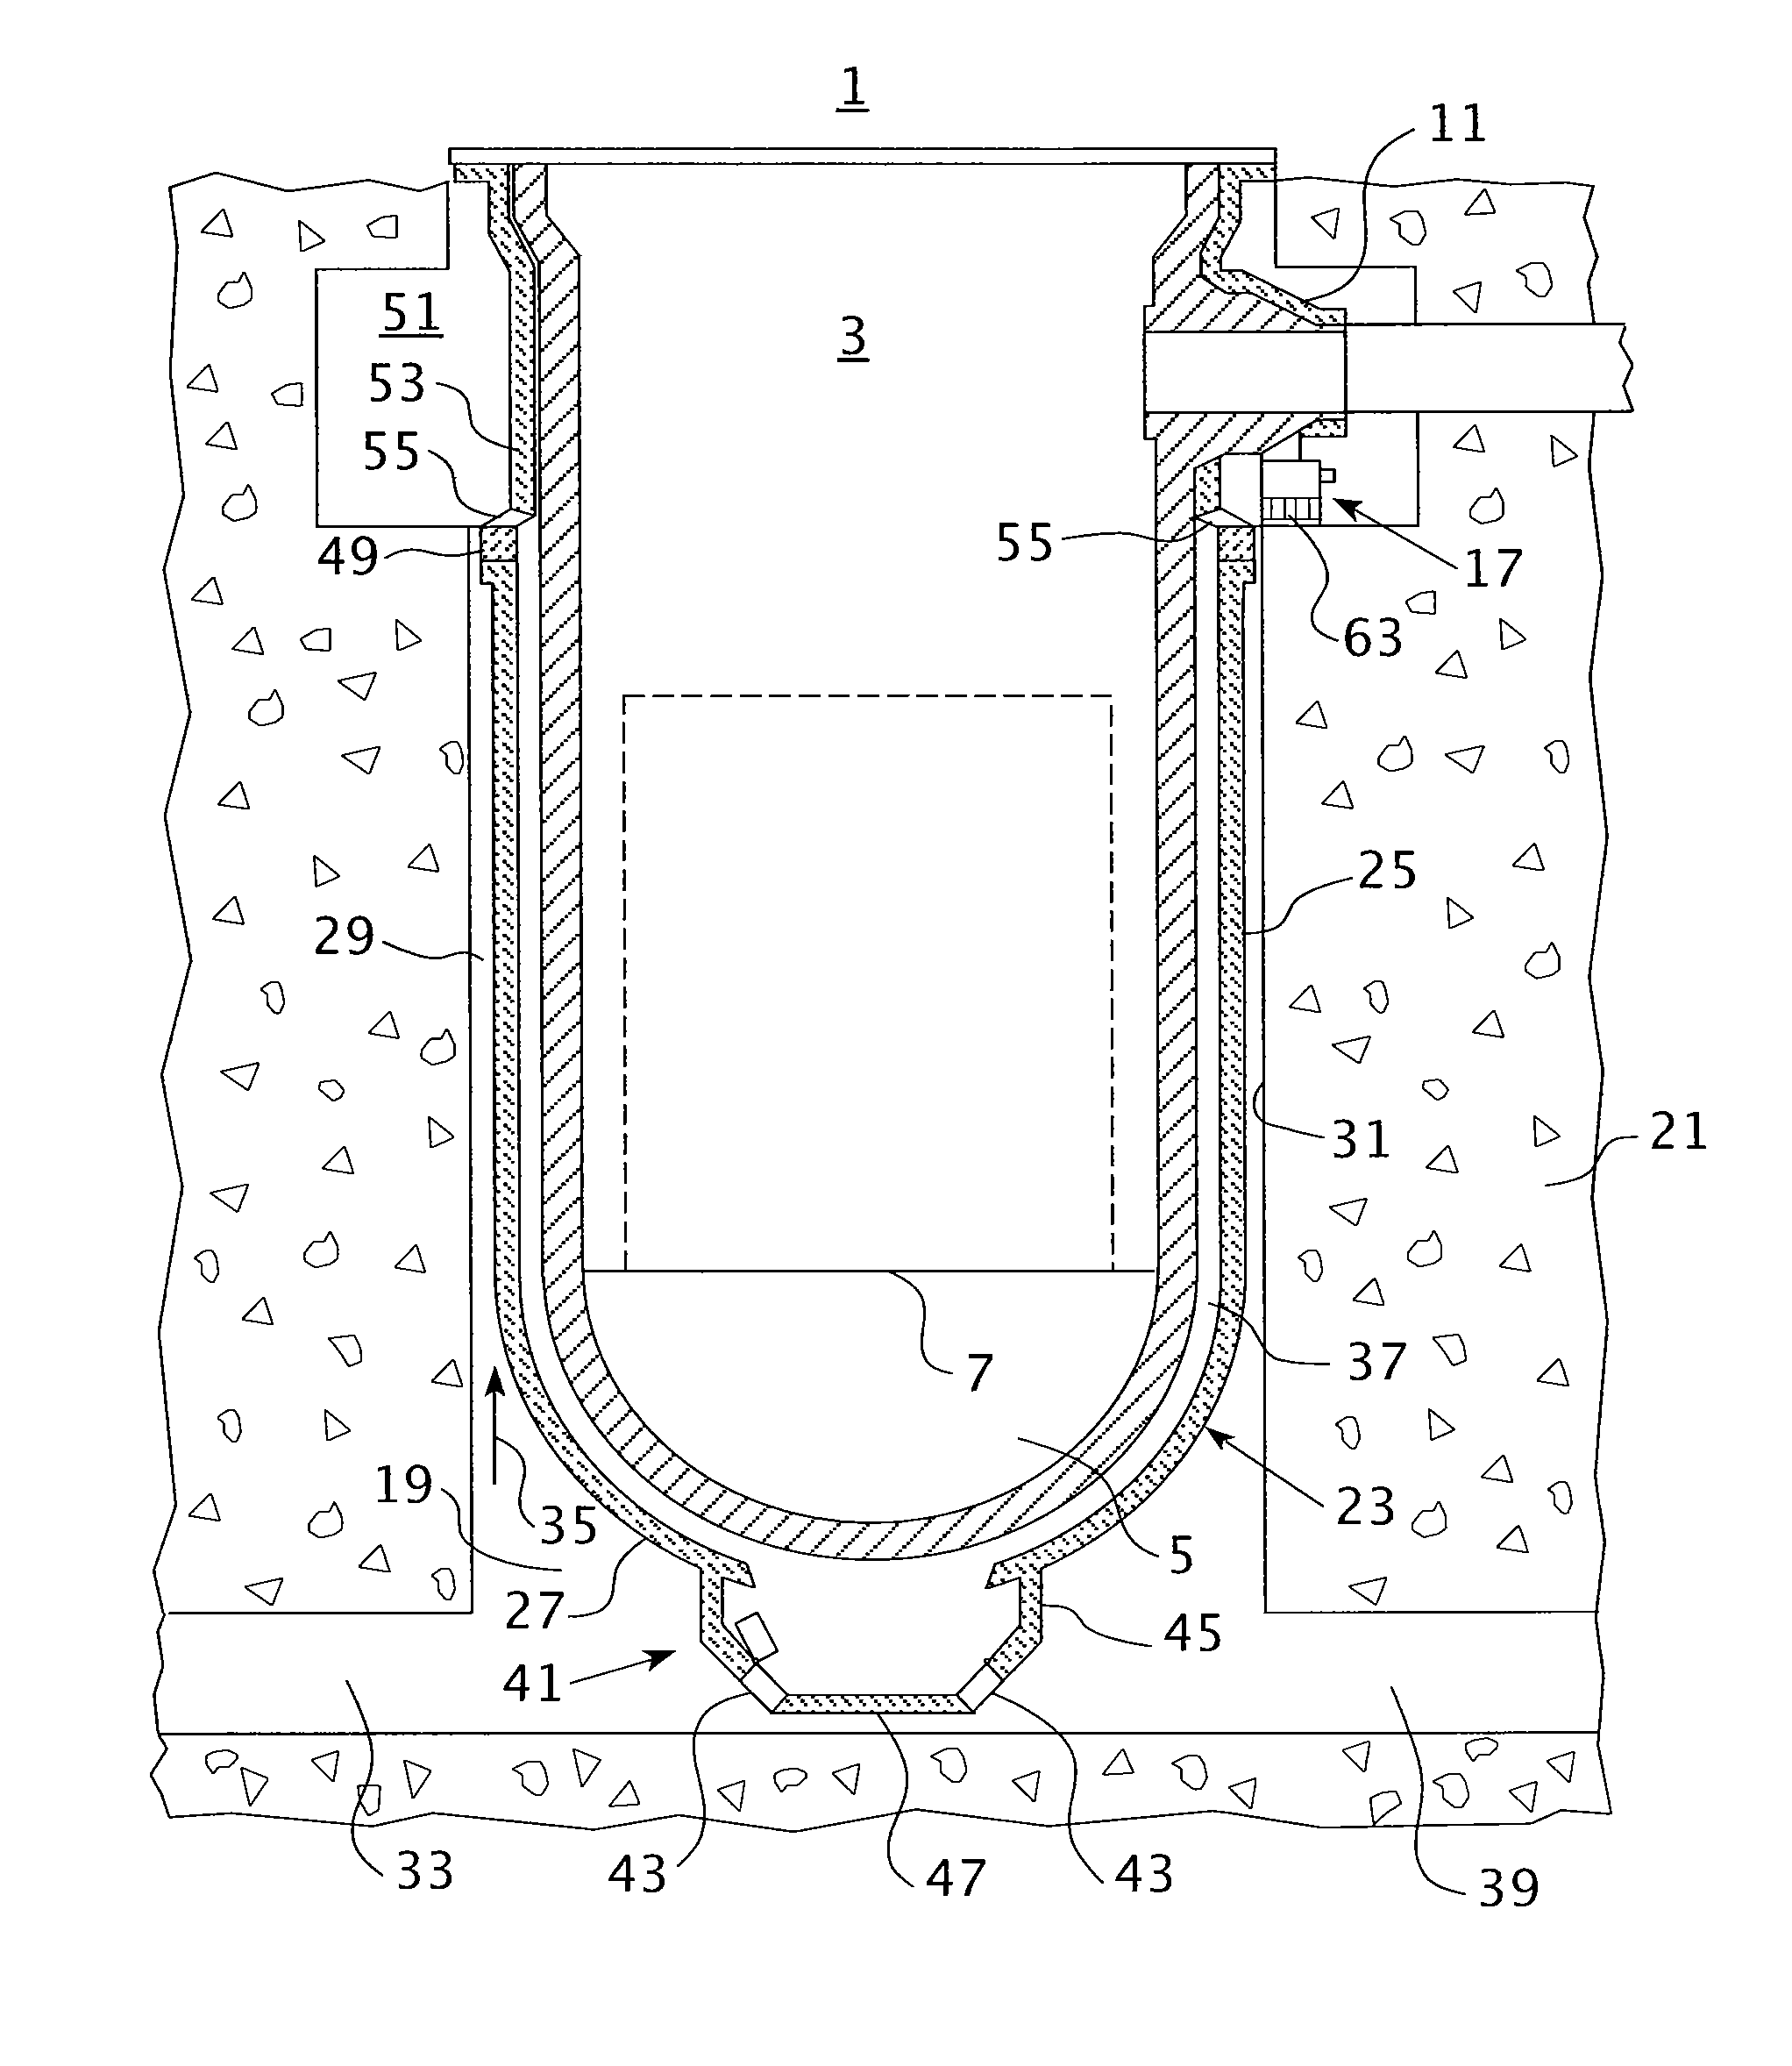 Nuclear reactor vessel fuel thermal insulating barrier